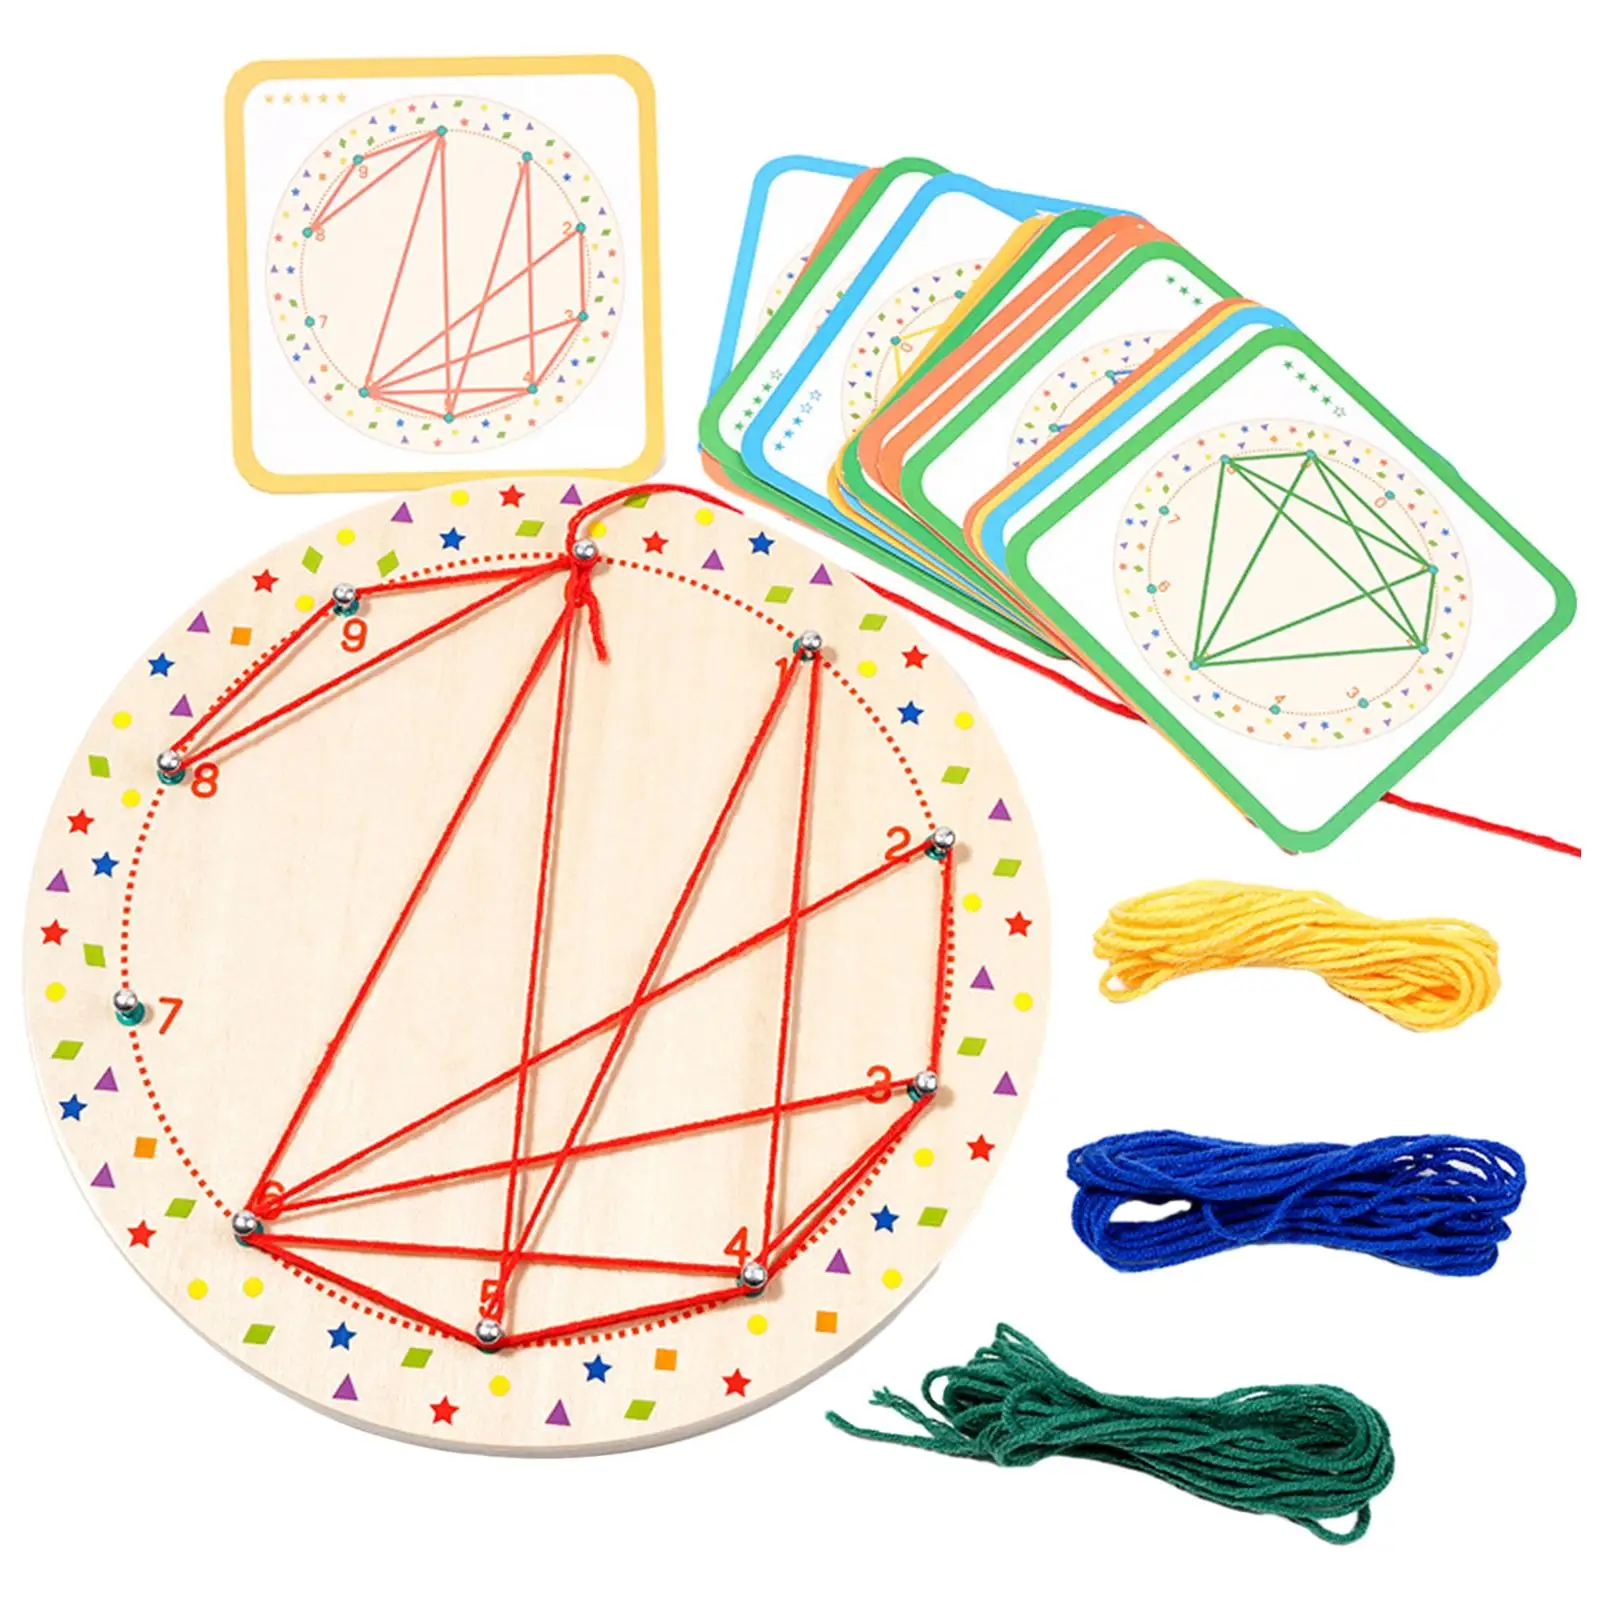 

Wooden Threading Board Fine Motor Skills Training Shape Lacing Projects for Ages 3 4 5 Years Old Kids Boys and Girls Activity